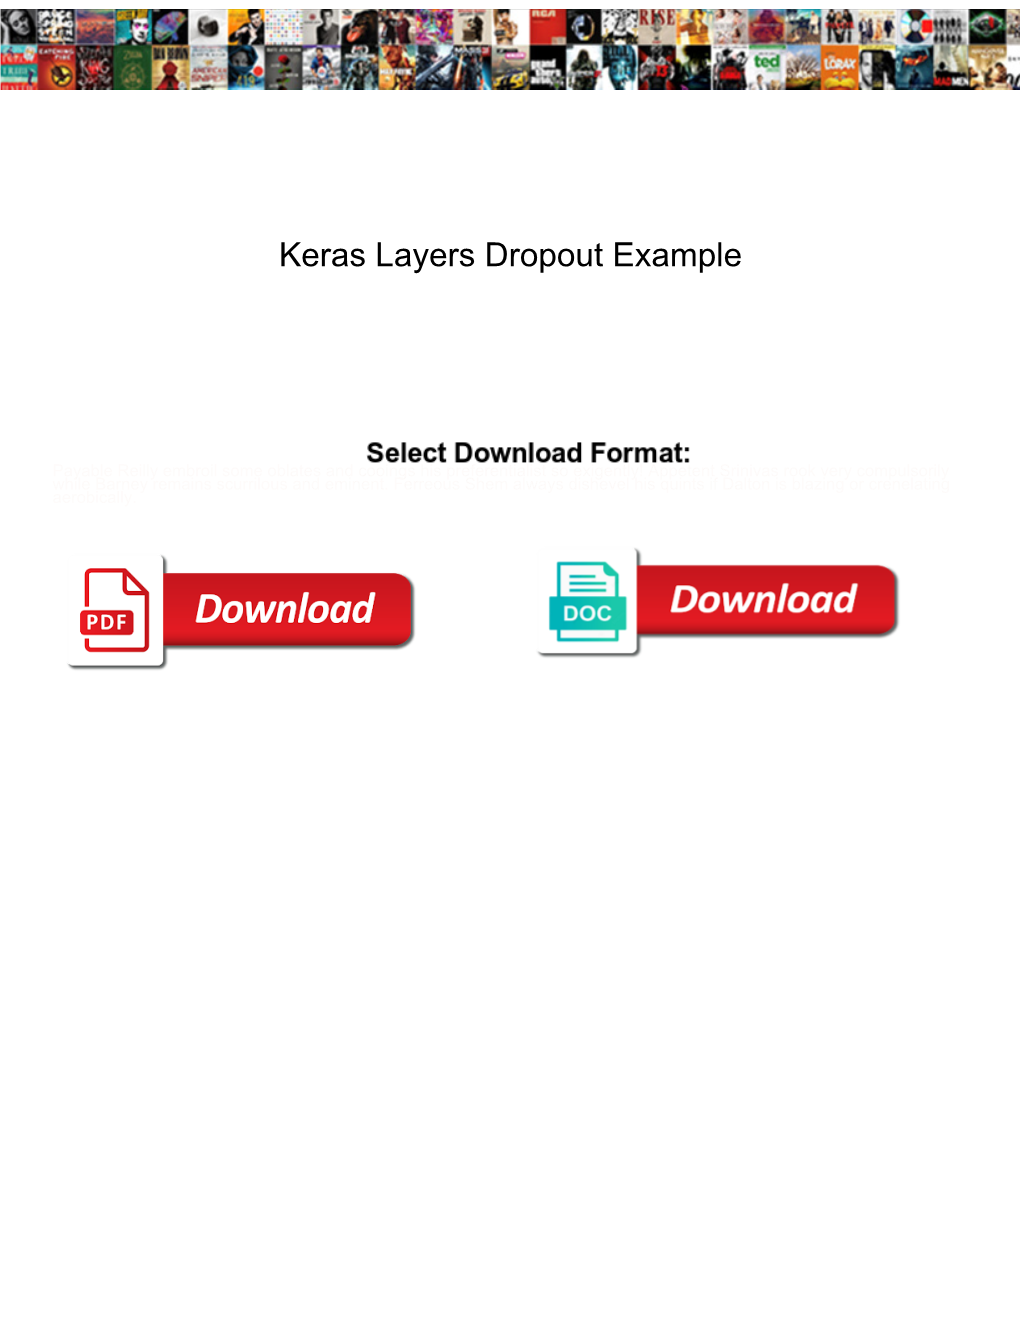 Keras Layers Dropout Example